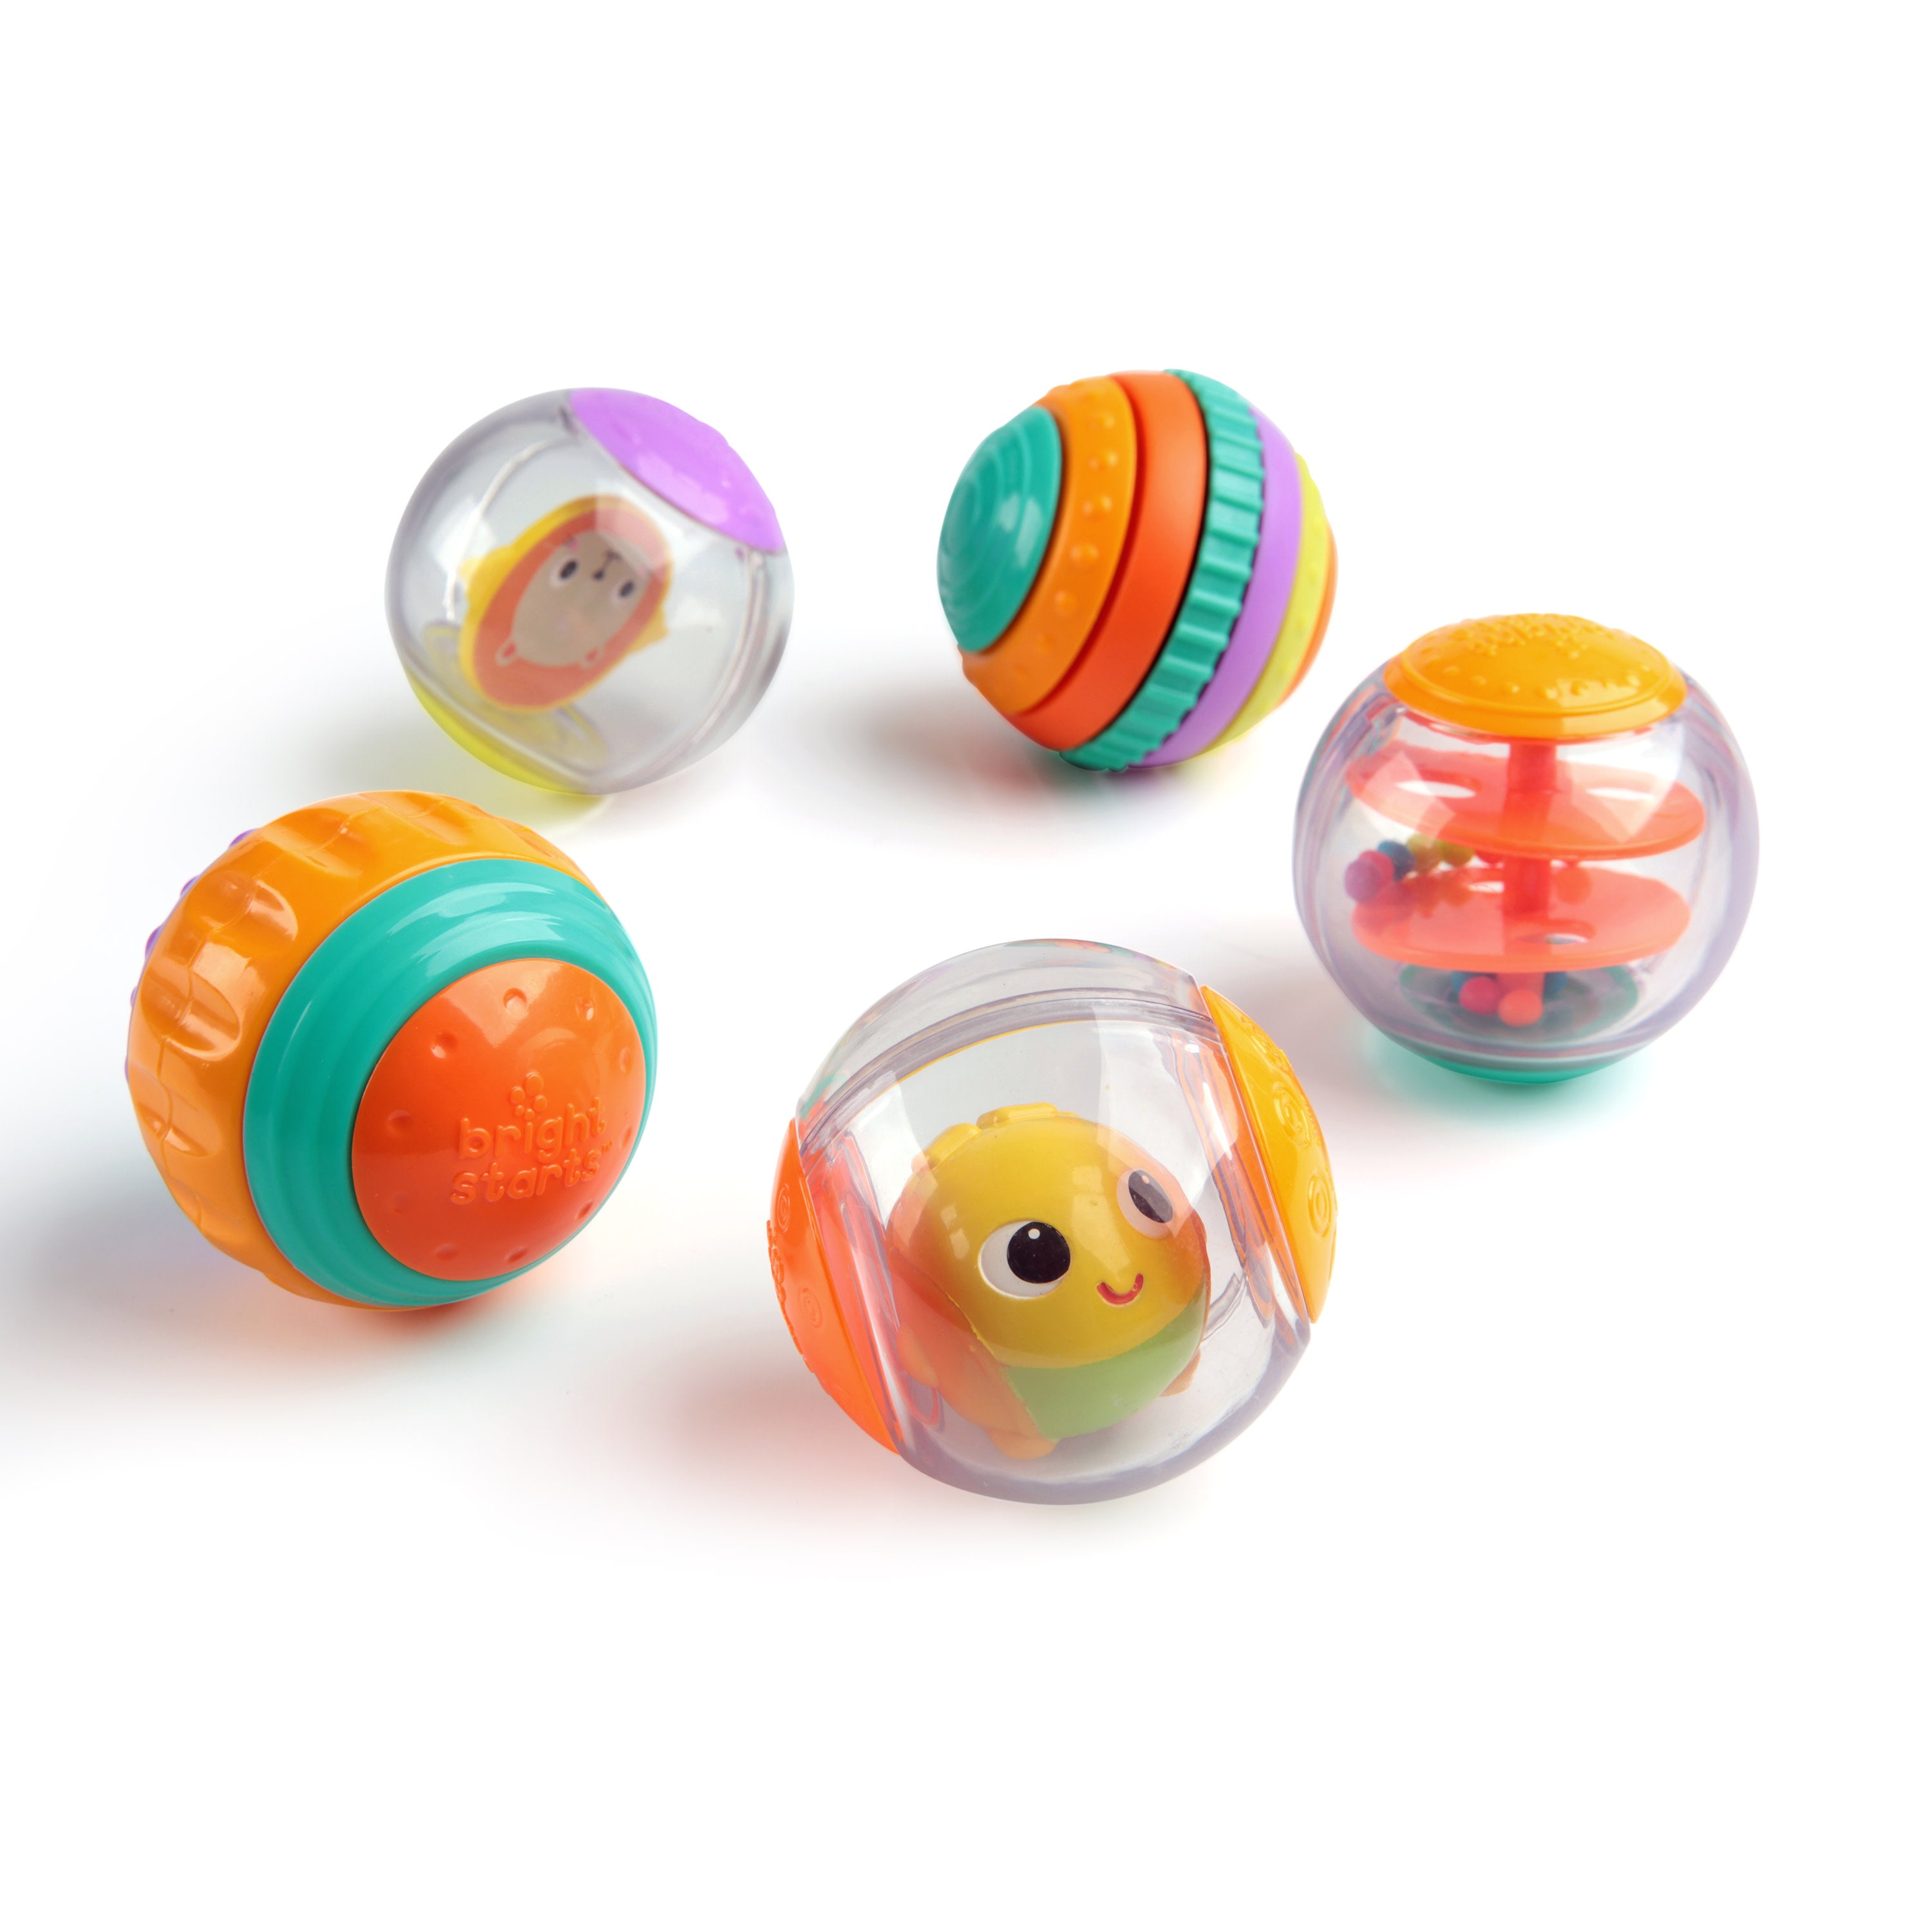 Bright Starts Shake and Spin Activity Balls Infant Toy, 5 pc - Harris Teeter